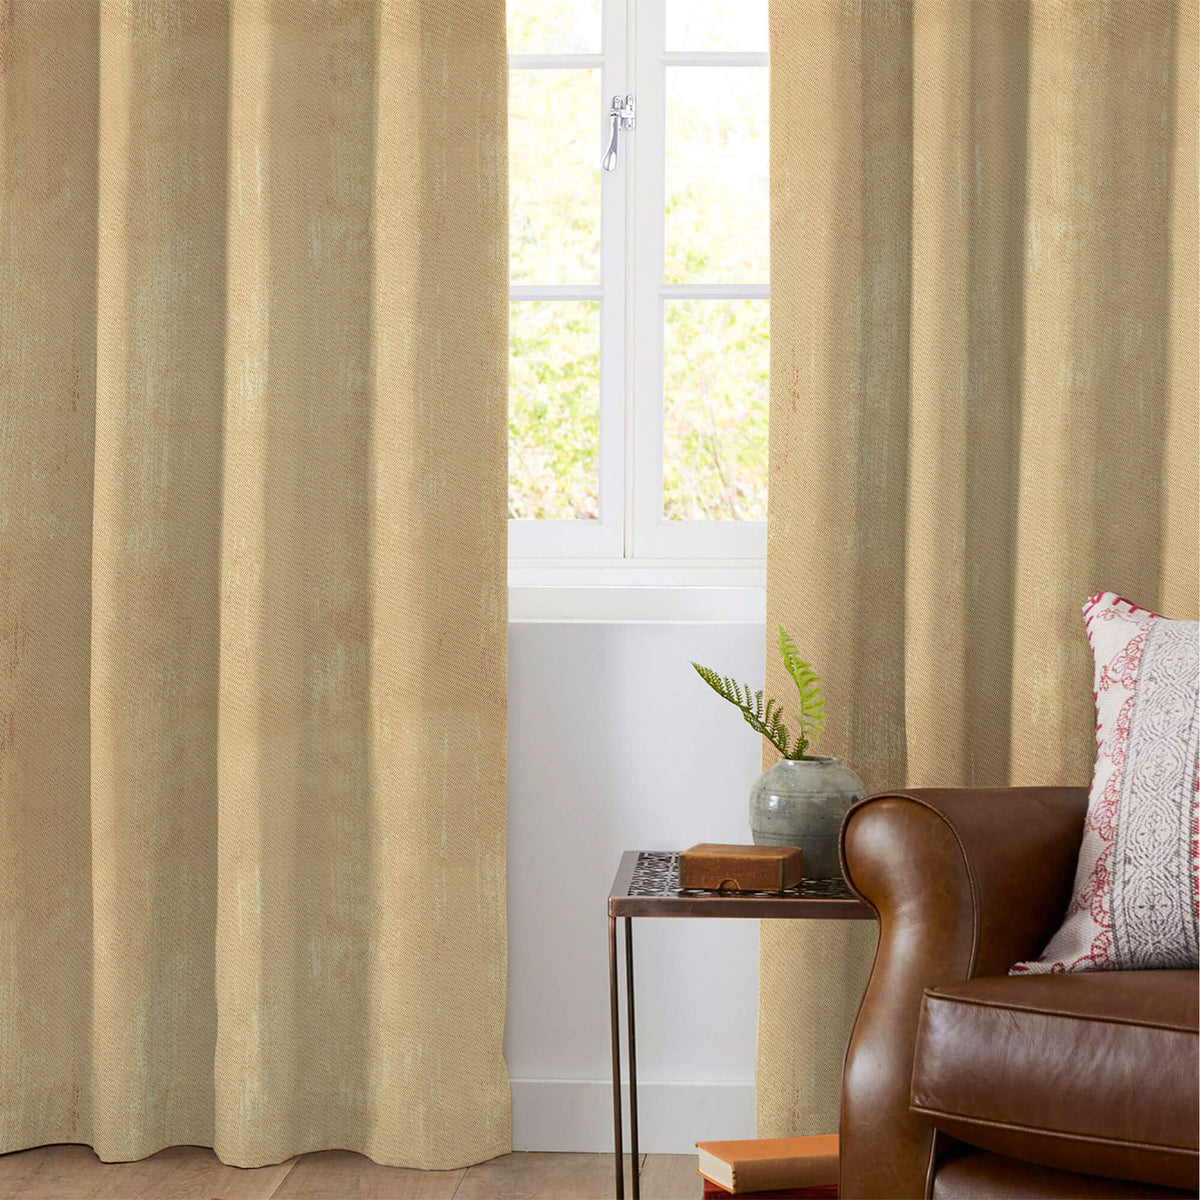 Brushed Cotton Lining - Curtain Materials Mad About Fabrics